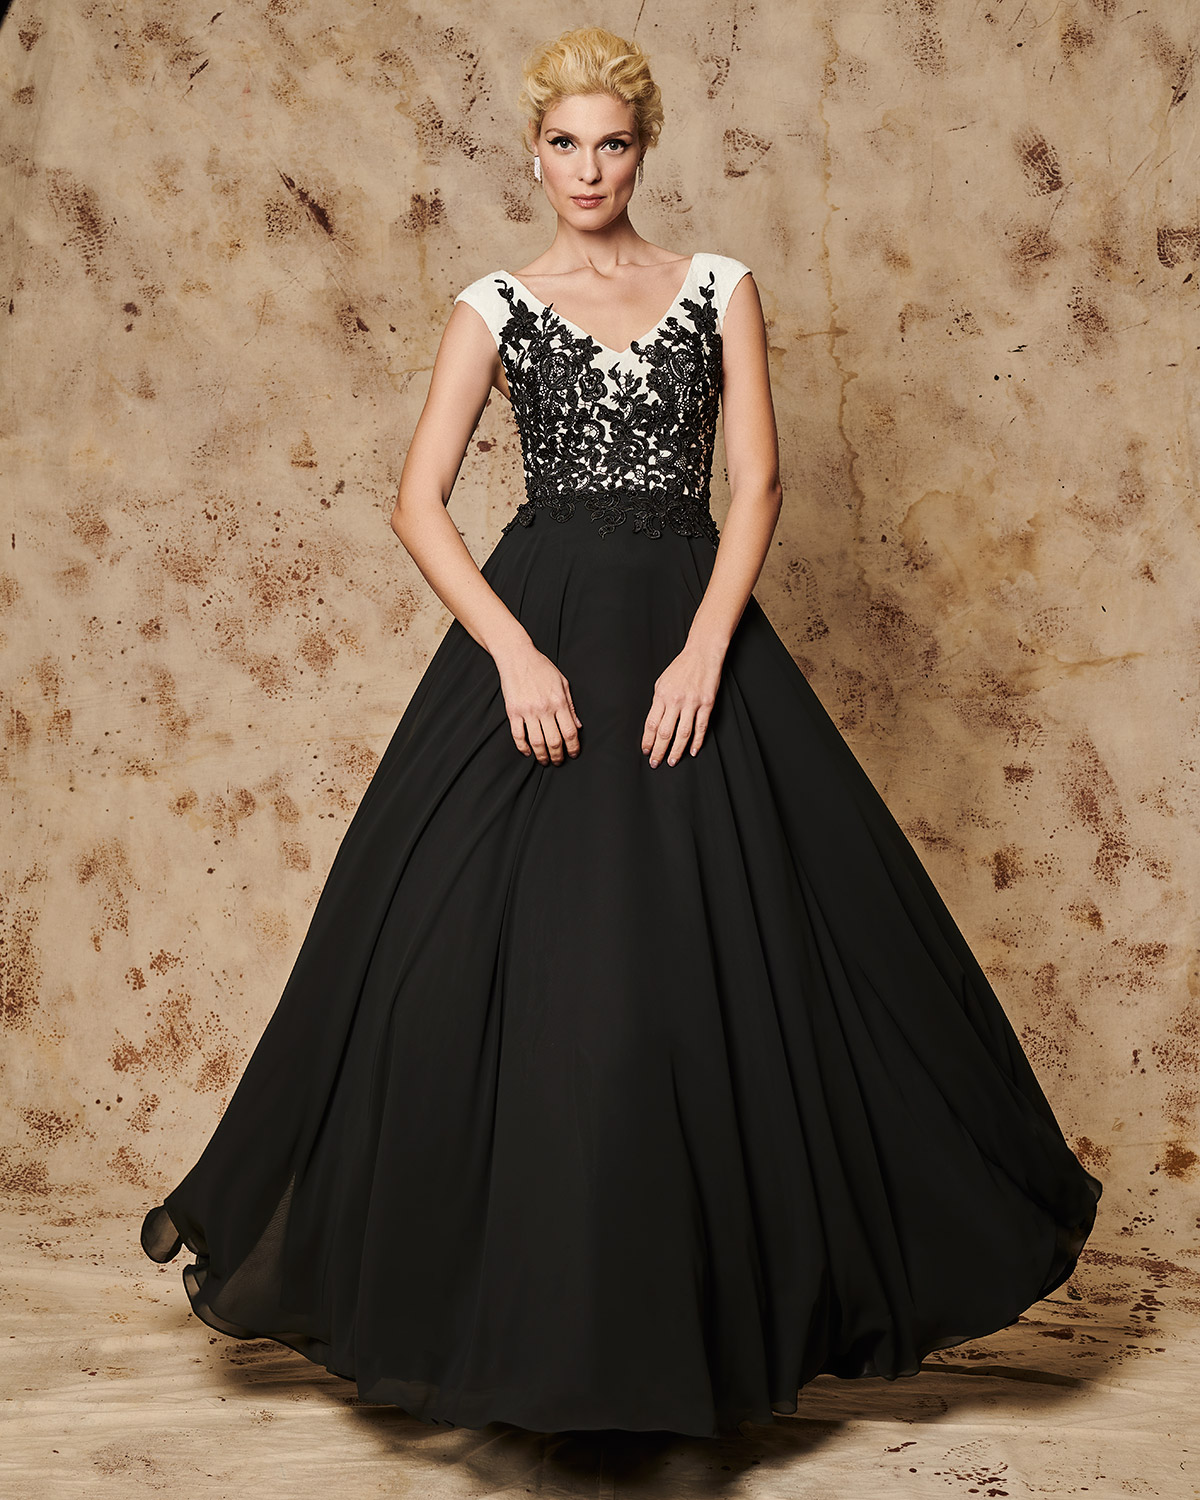 Classic Dresses / Long evening dress with lace bust